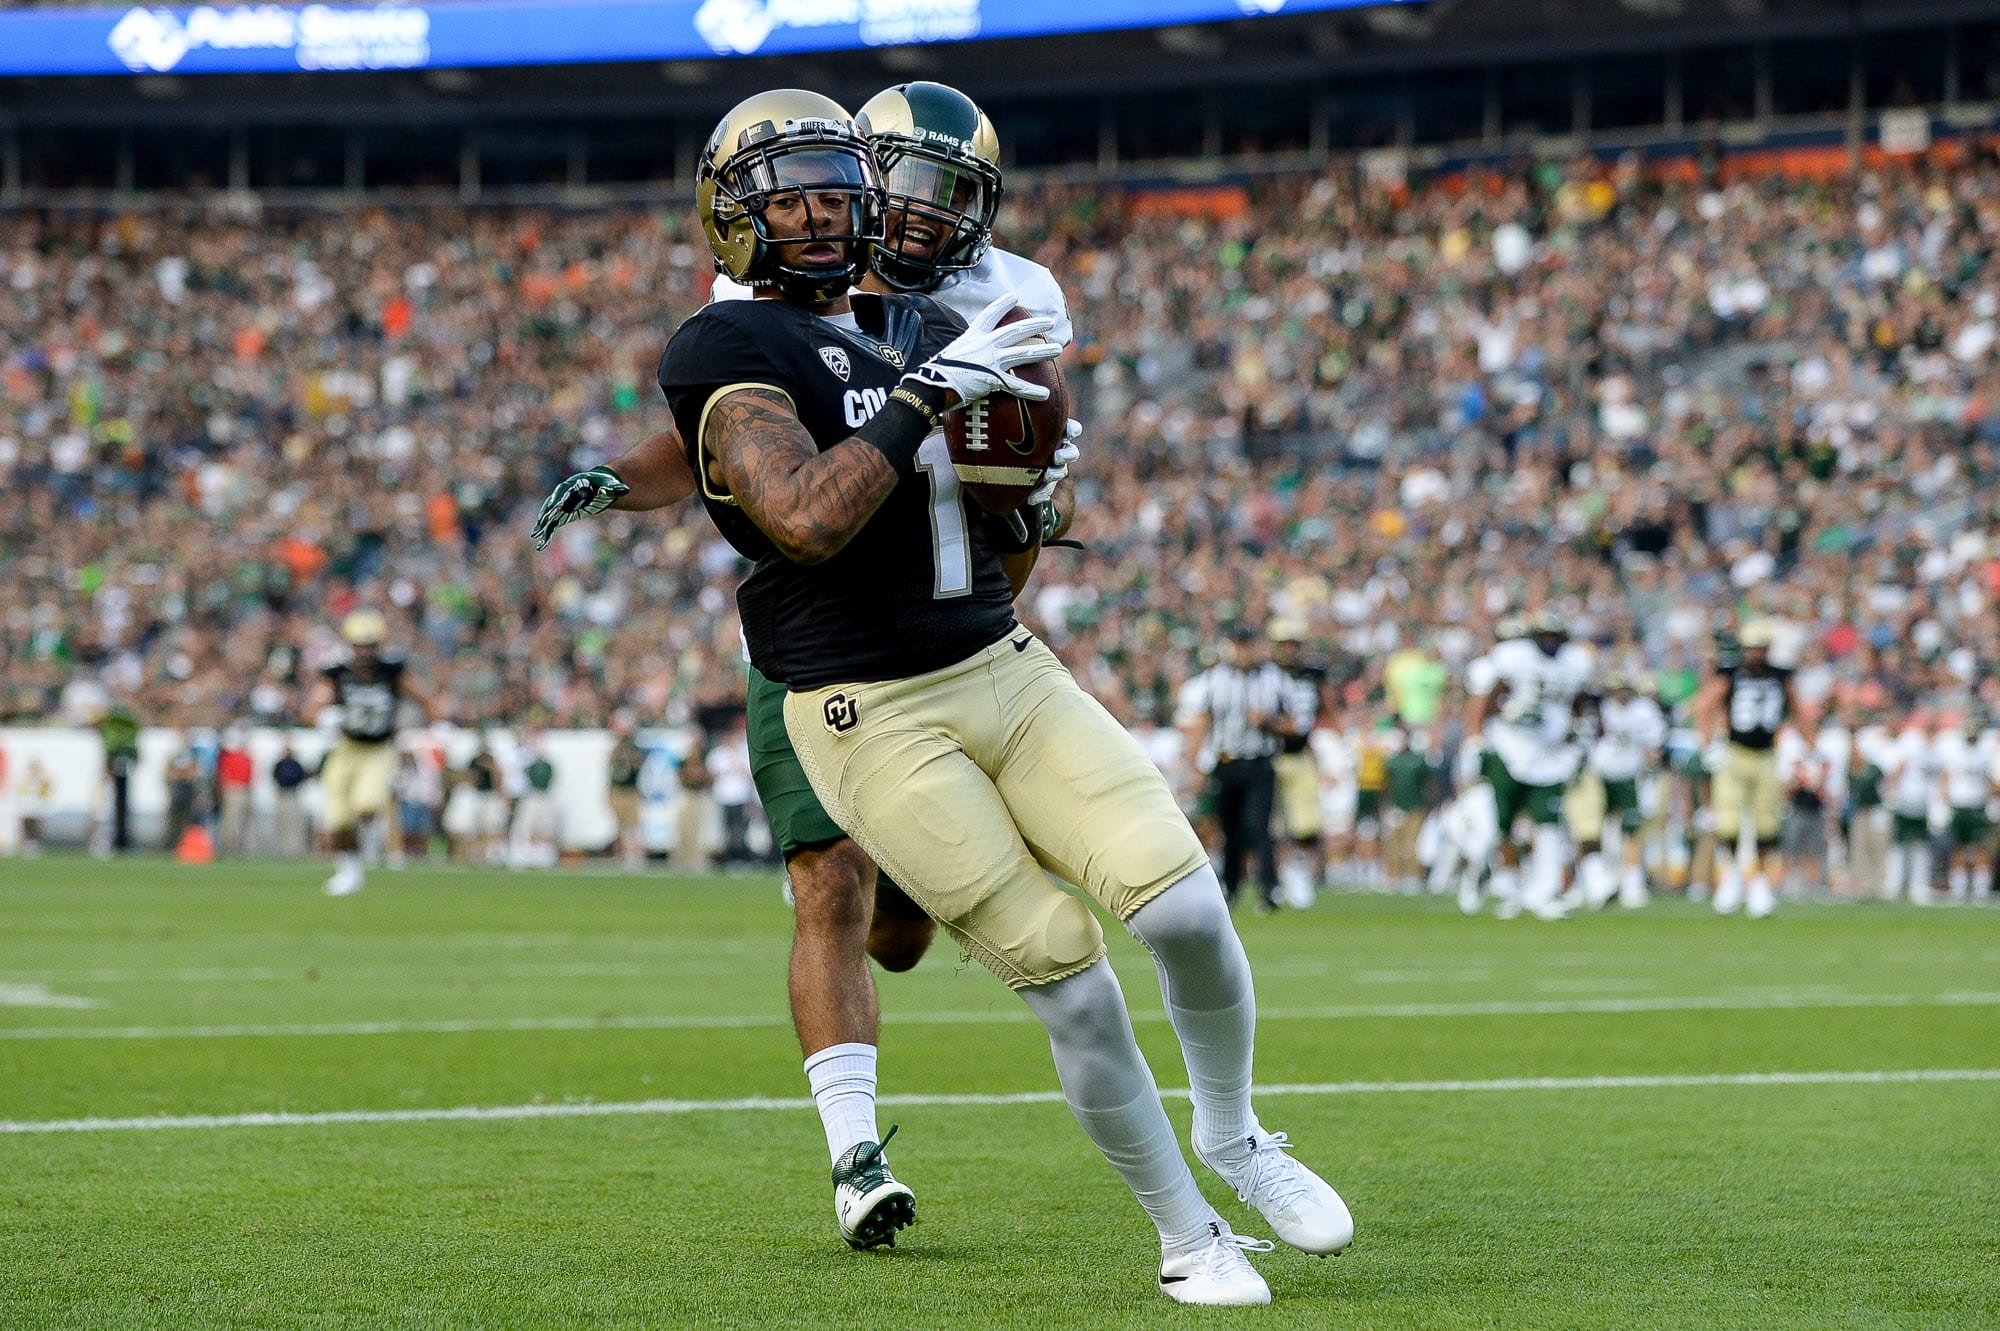 Colorado Football 3 key takeaways from victory against Colorado State